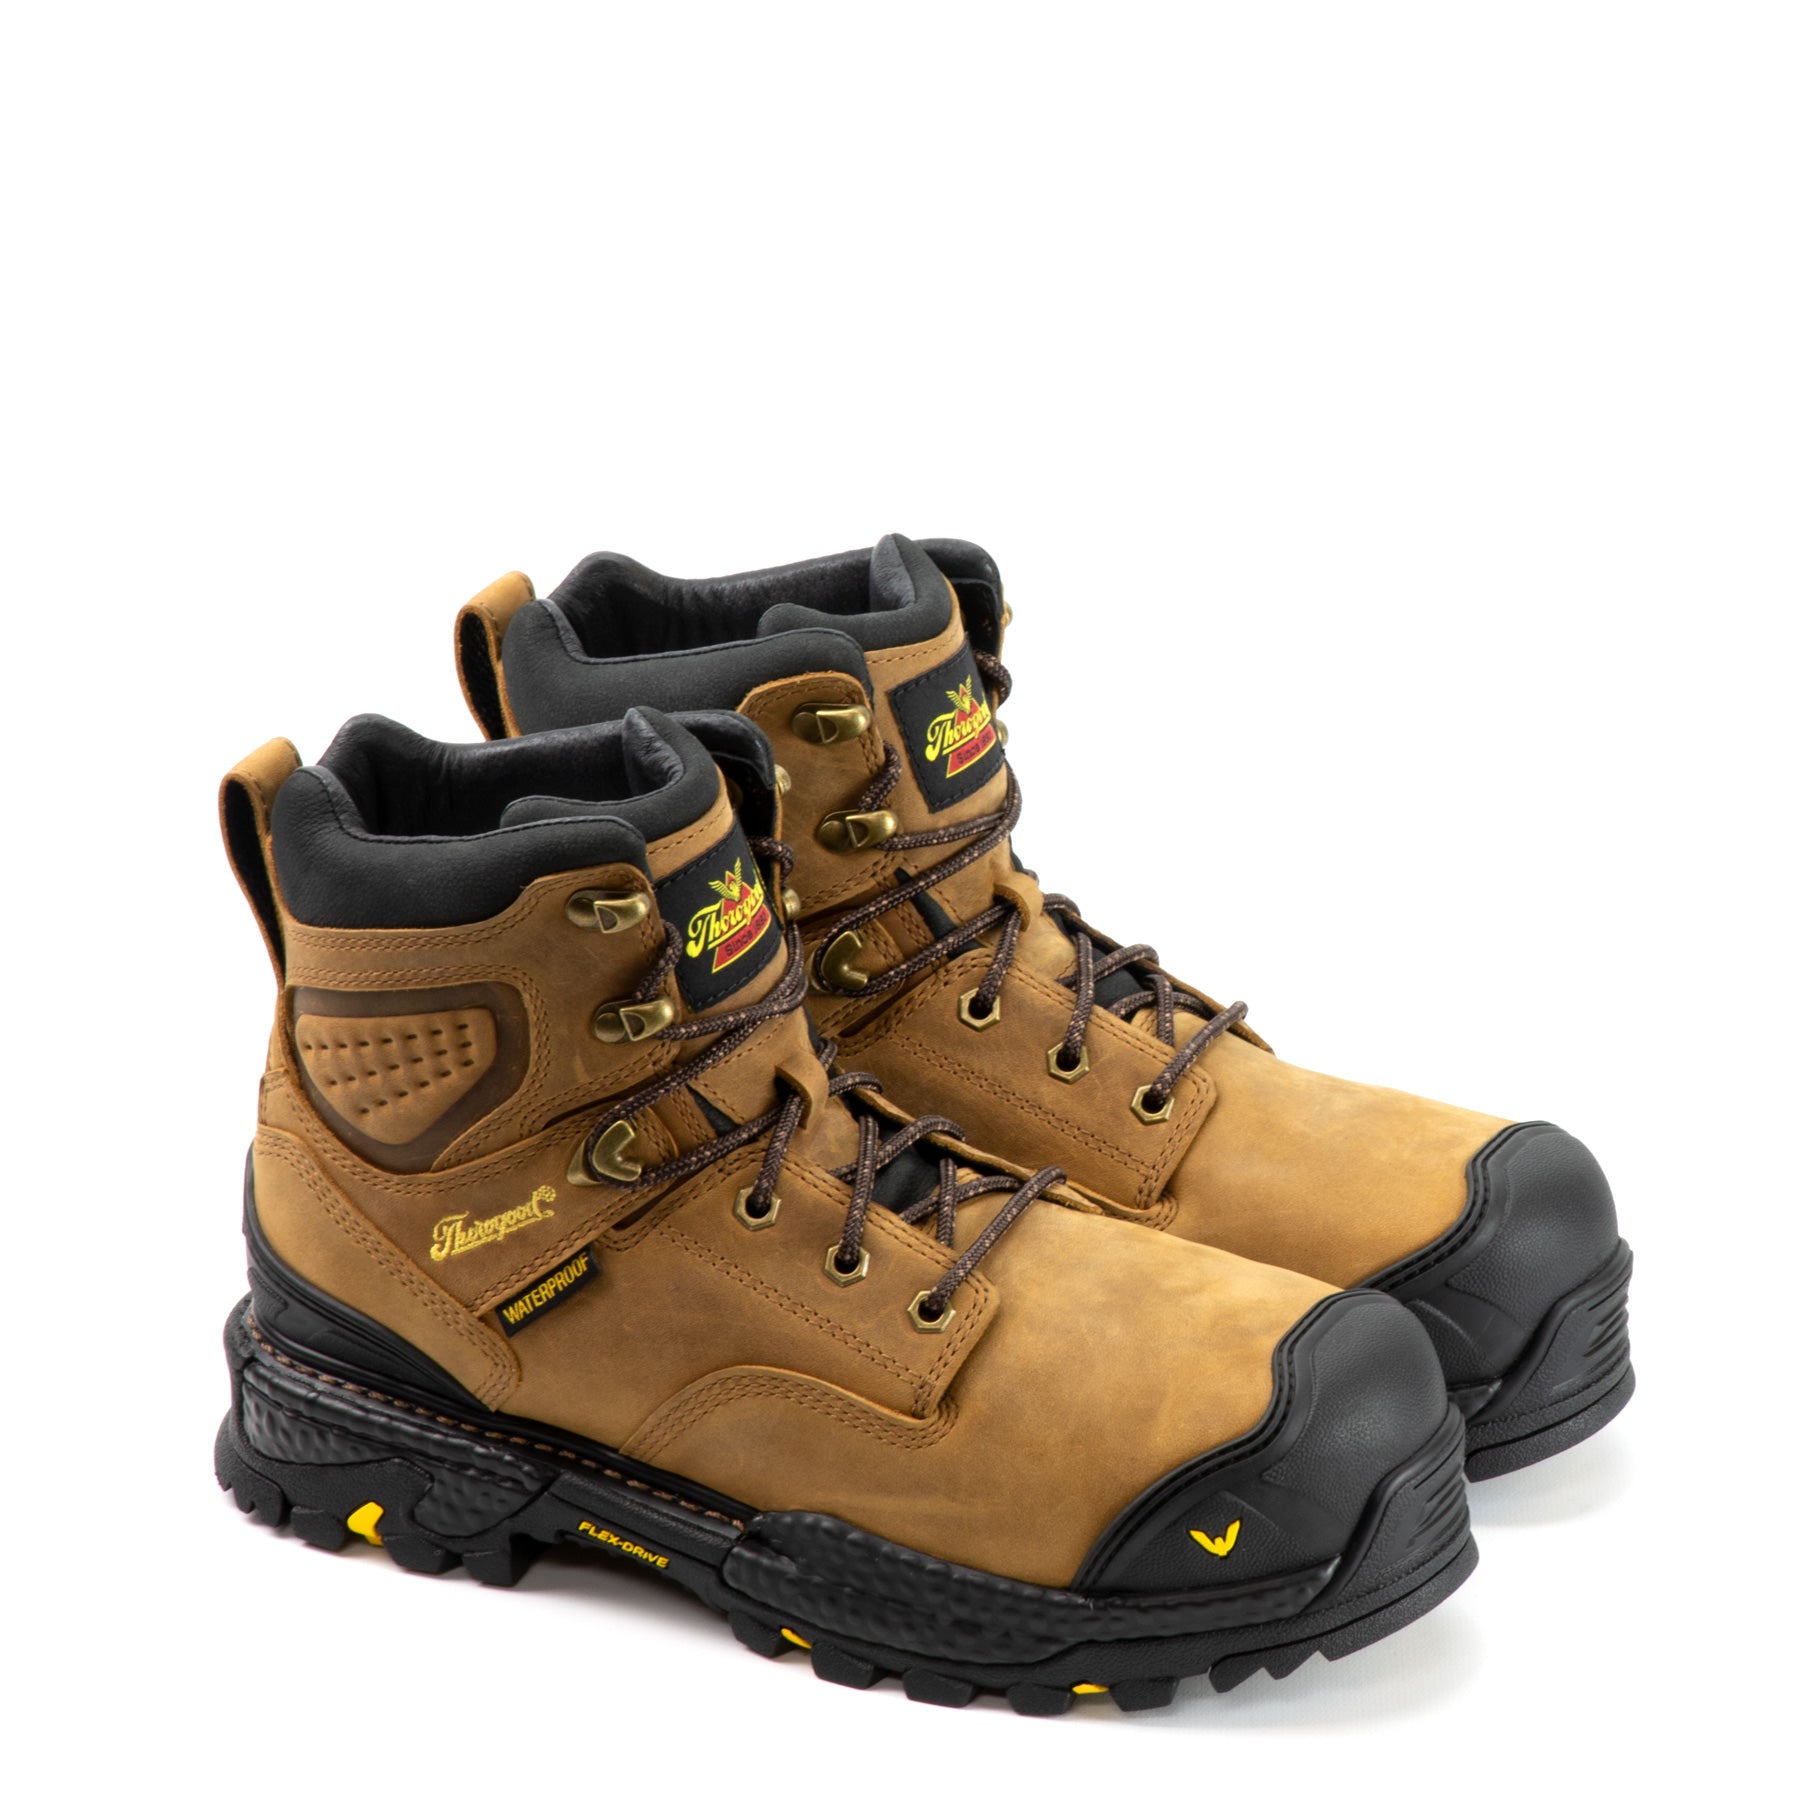 Thorogood Men's Infinity FD Series 6" Waterproof Composite Work Boot in Butterscotch from the side